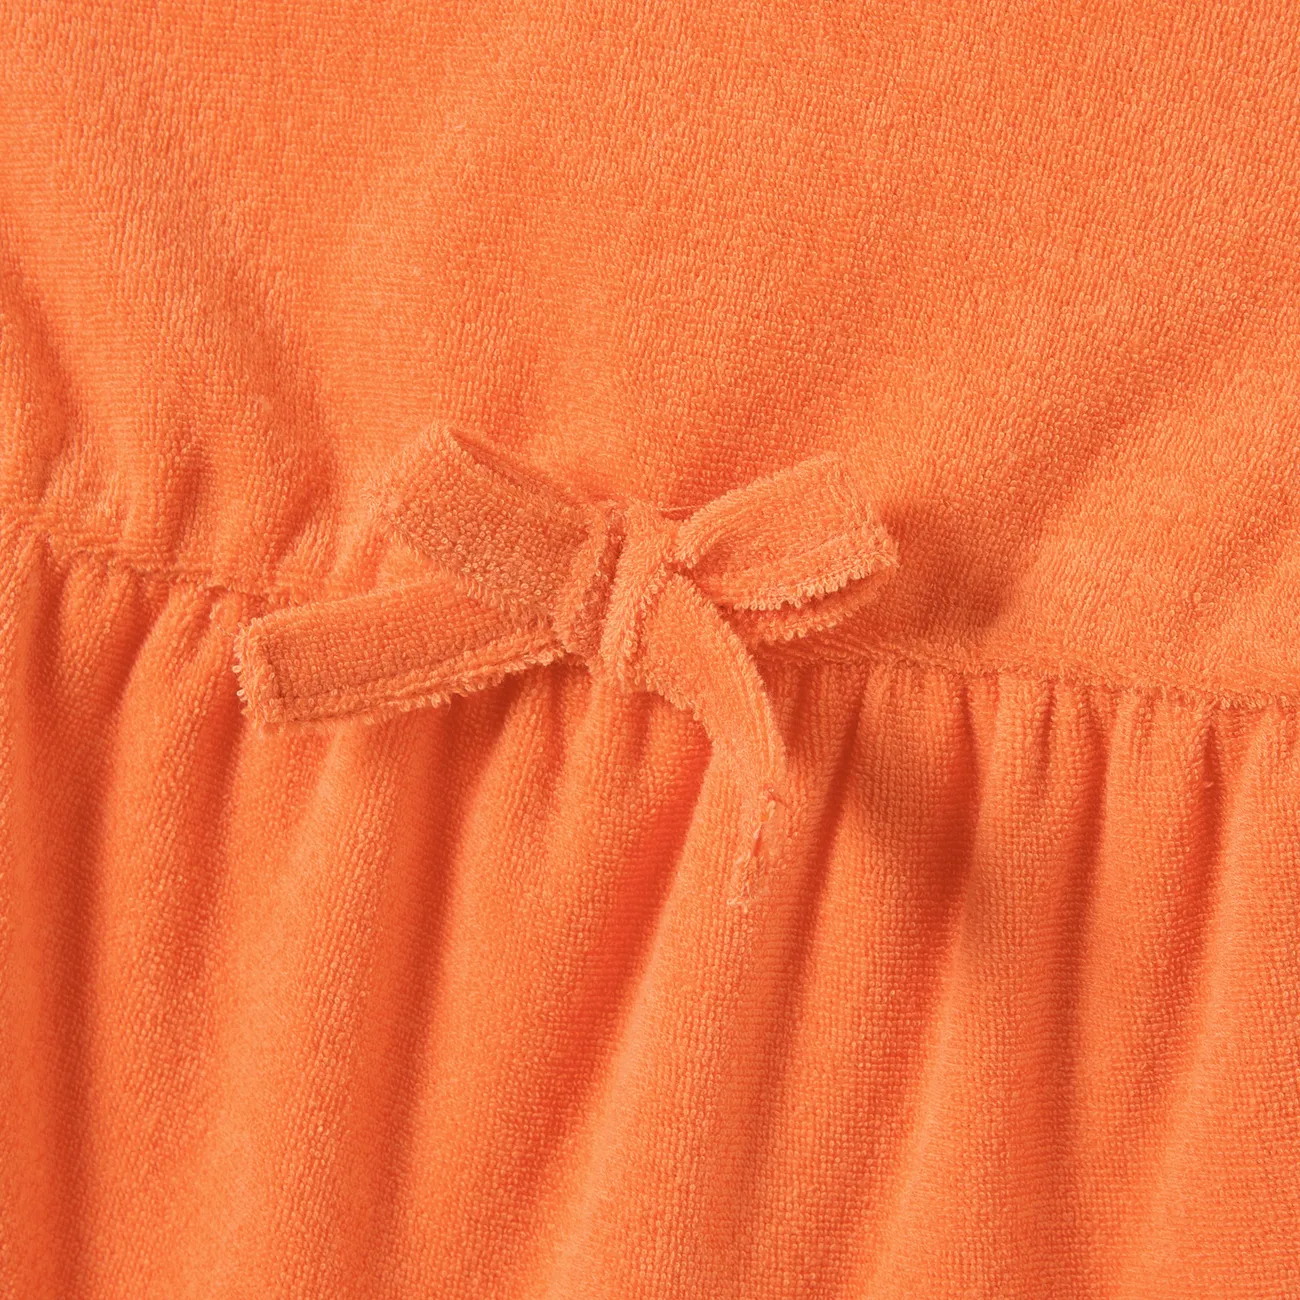 Mommy and Me Orange Towel Fabric Romper with Pockets and Drawstring Orangeyellow big image 1